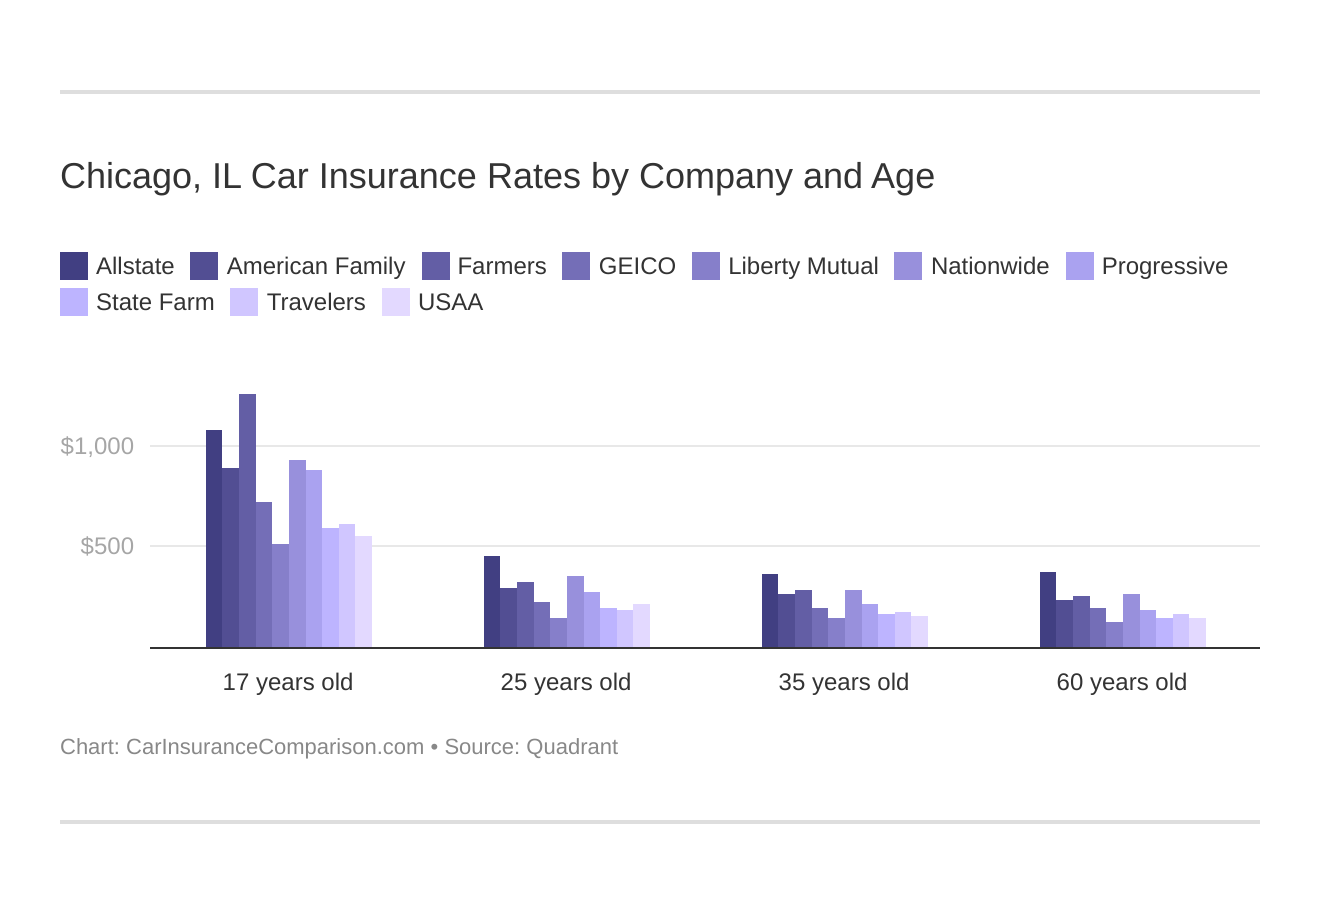 Chicago, IL Car Insurance Rates by Company and Age